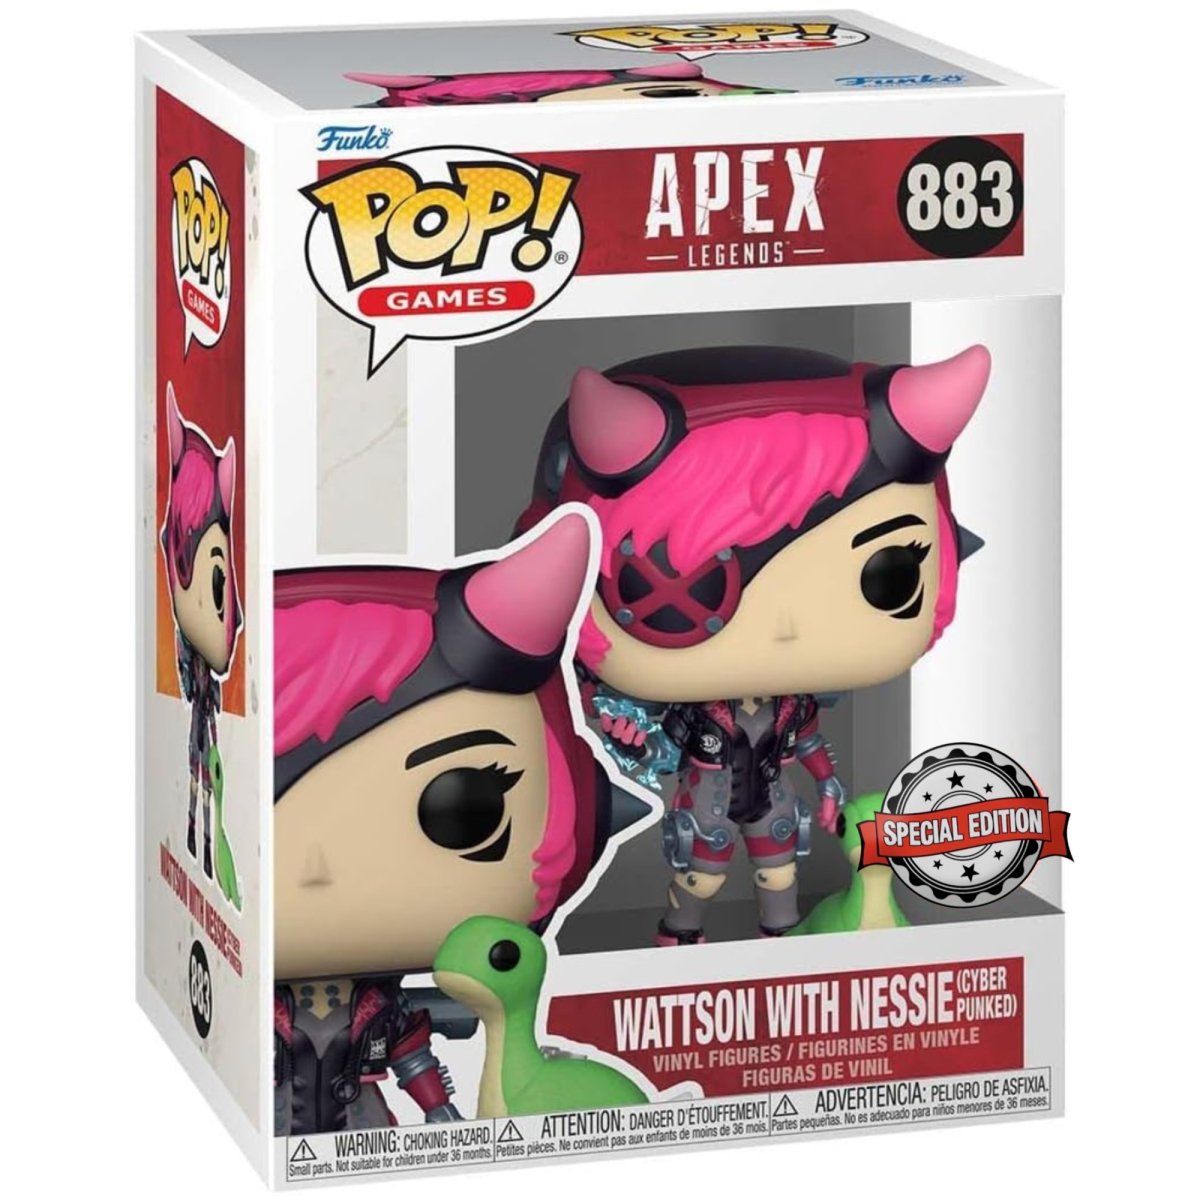 Apex Legends - Wattson with Nessie (Cyber Punked) (Special Edition) #883 - Funko Pop! Vinyl Games - Persona Toys